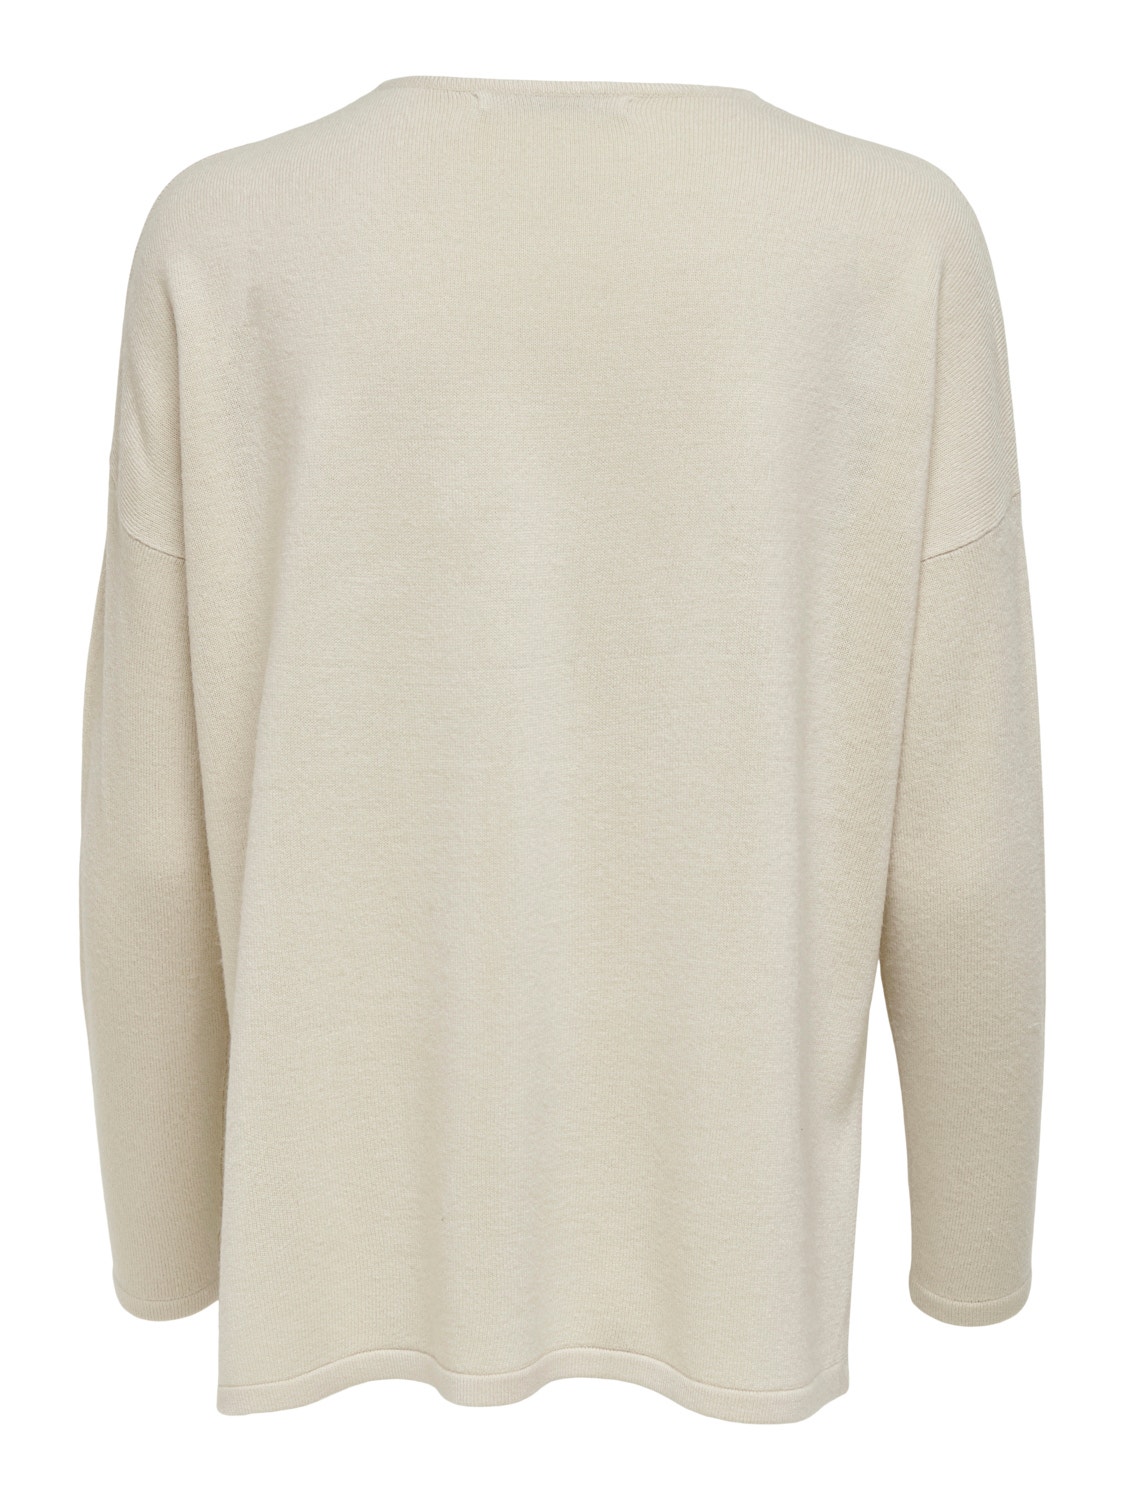 ONLY Petite V-neck Knitted Pullover -Pumice Stone - 15276466